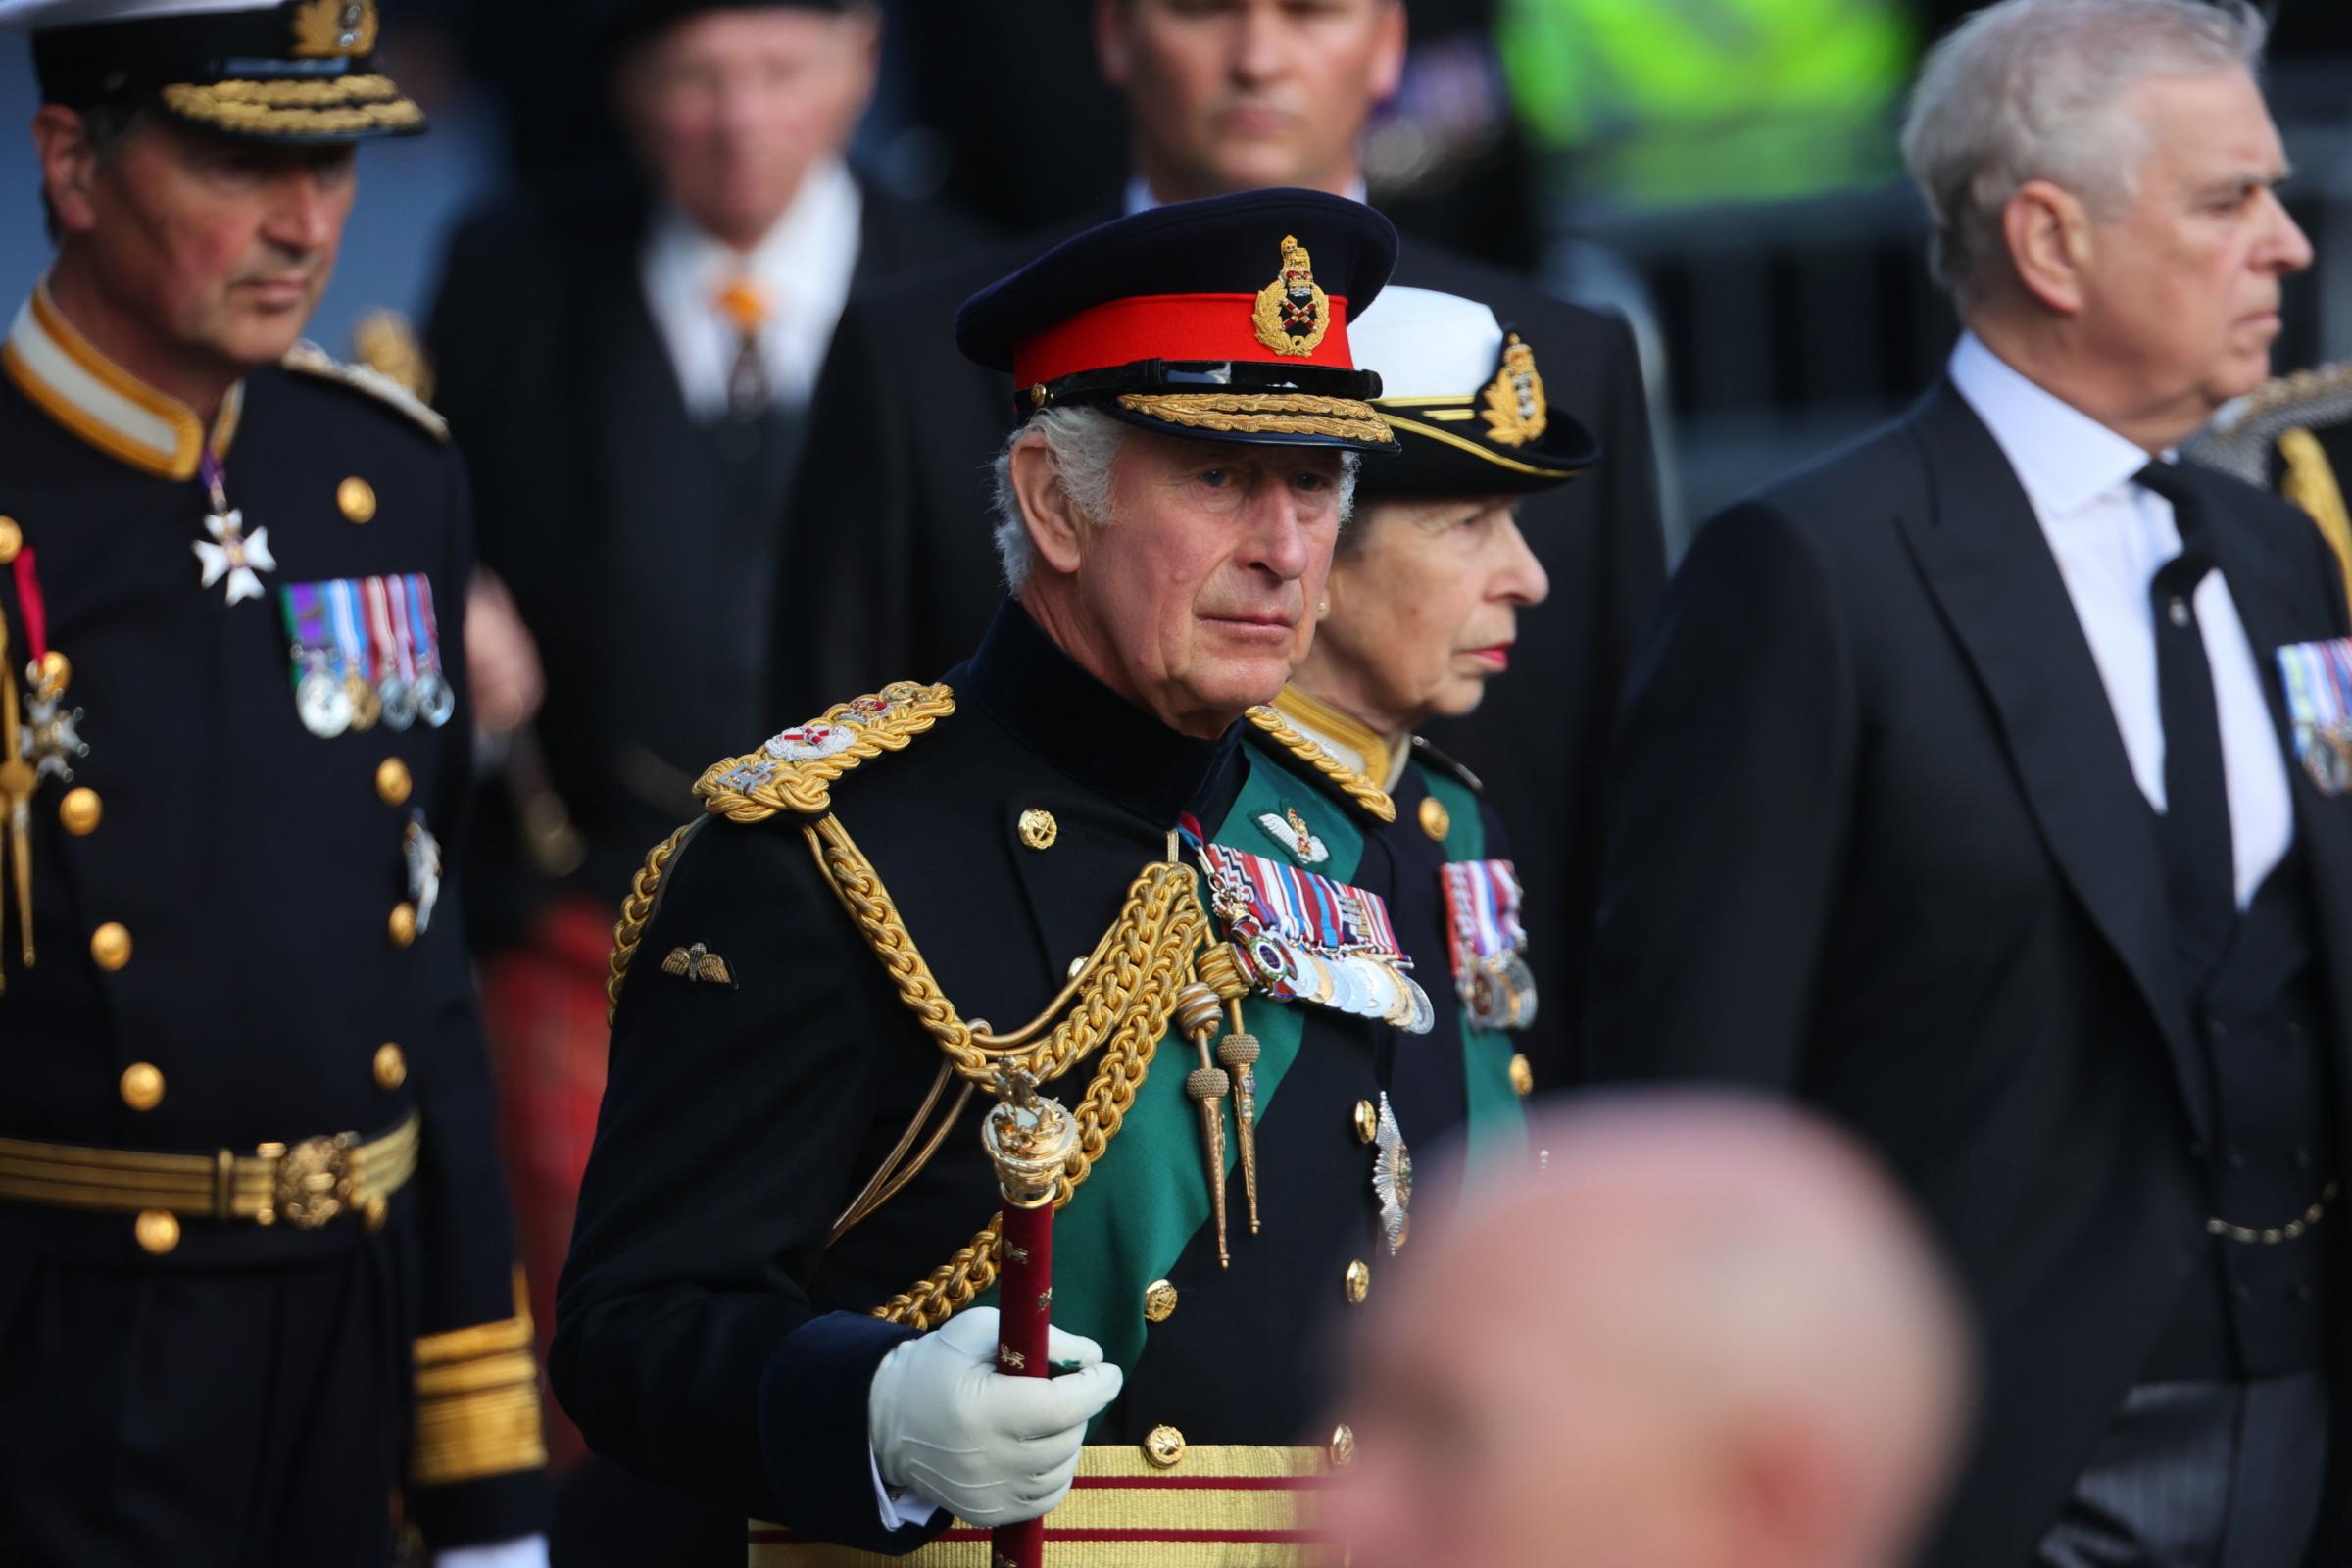 (left to right) Vice Admiral Timothy Laurence, King Charles III, the Princess Royal and the Duke of York join the procession of Queen Elizabeths coffin from the Palace of Holyroodhouse to St Giles Cathedral, Edinburgh for a Service of Prayer and